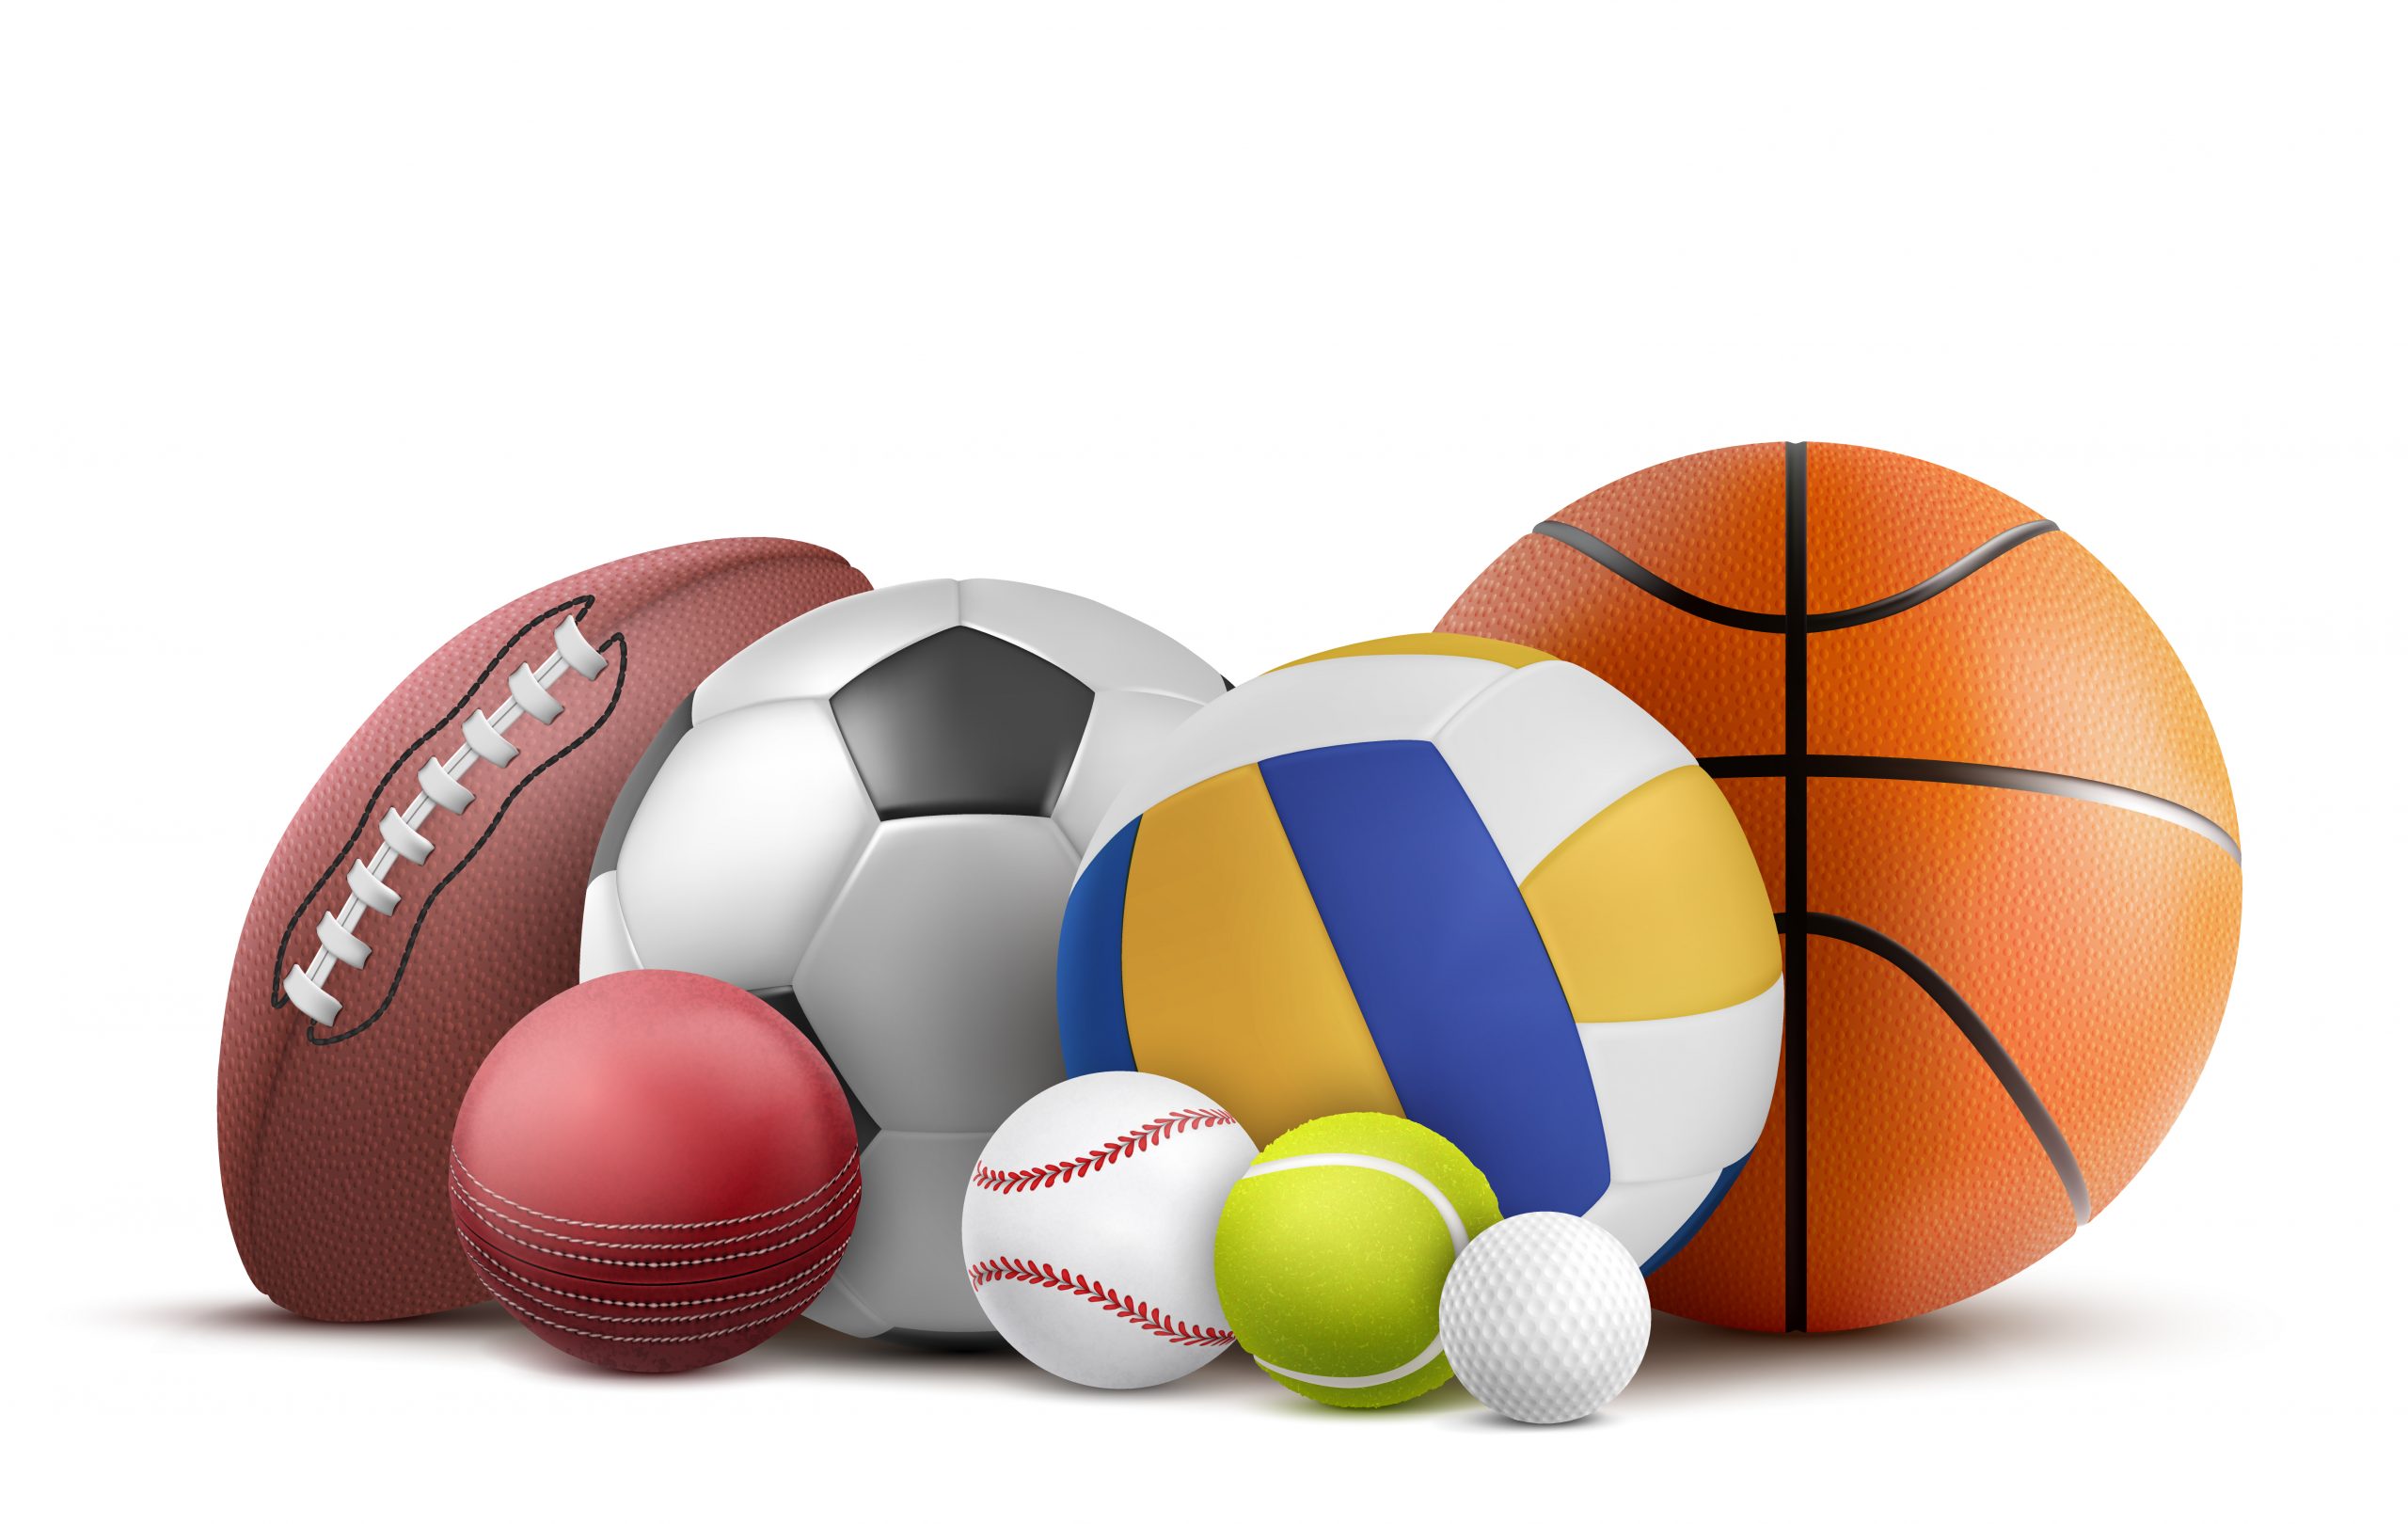 Balls for soccer, rugby, baseball and other sports